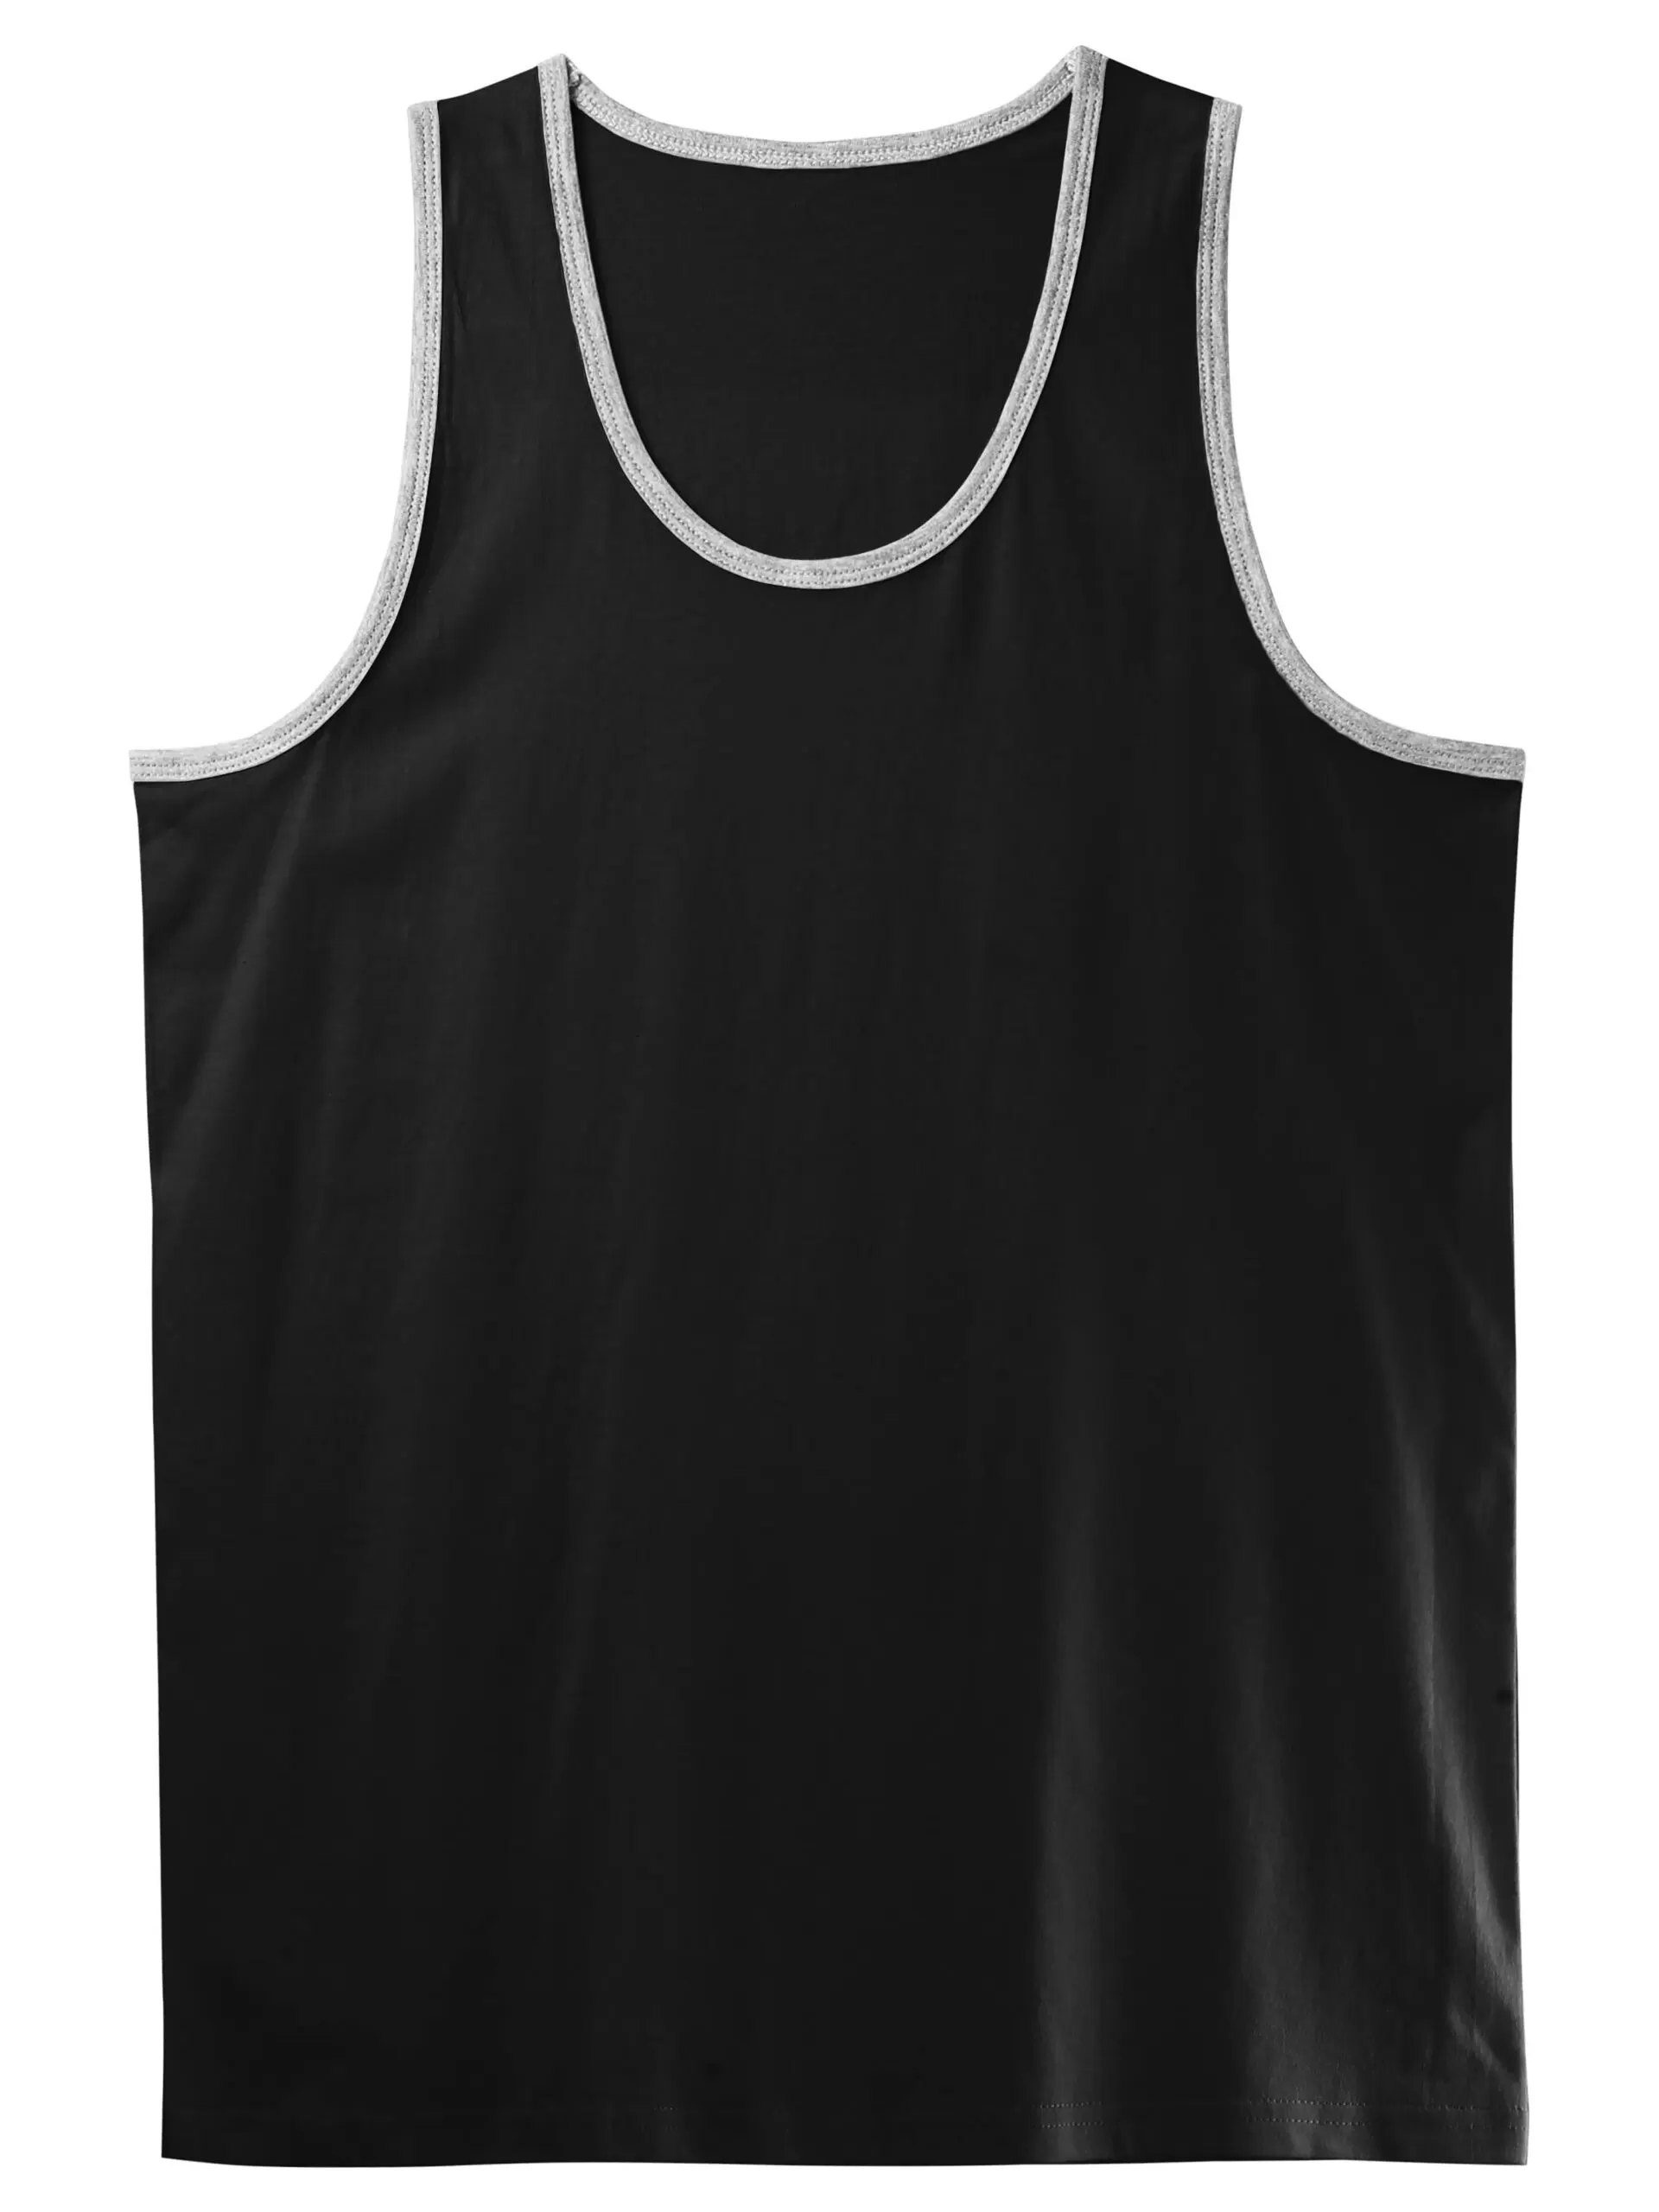 Bangladesh Wholesale Men's Classic Solid Tank Top Athletic Comfort Sleeveless T Shirts Factory